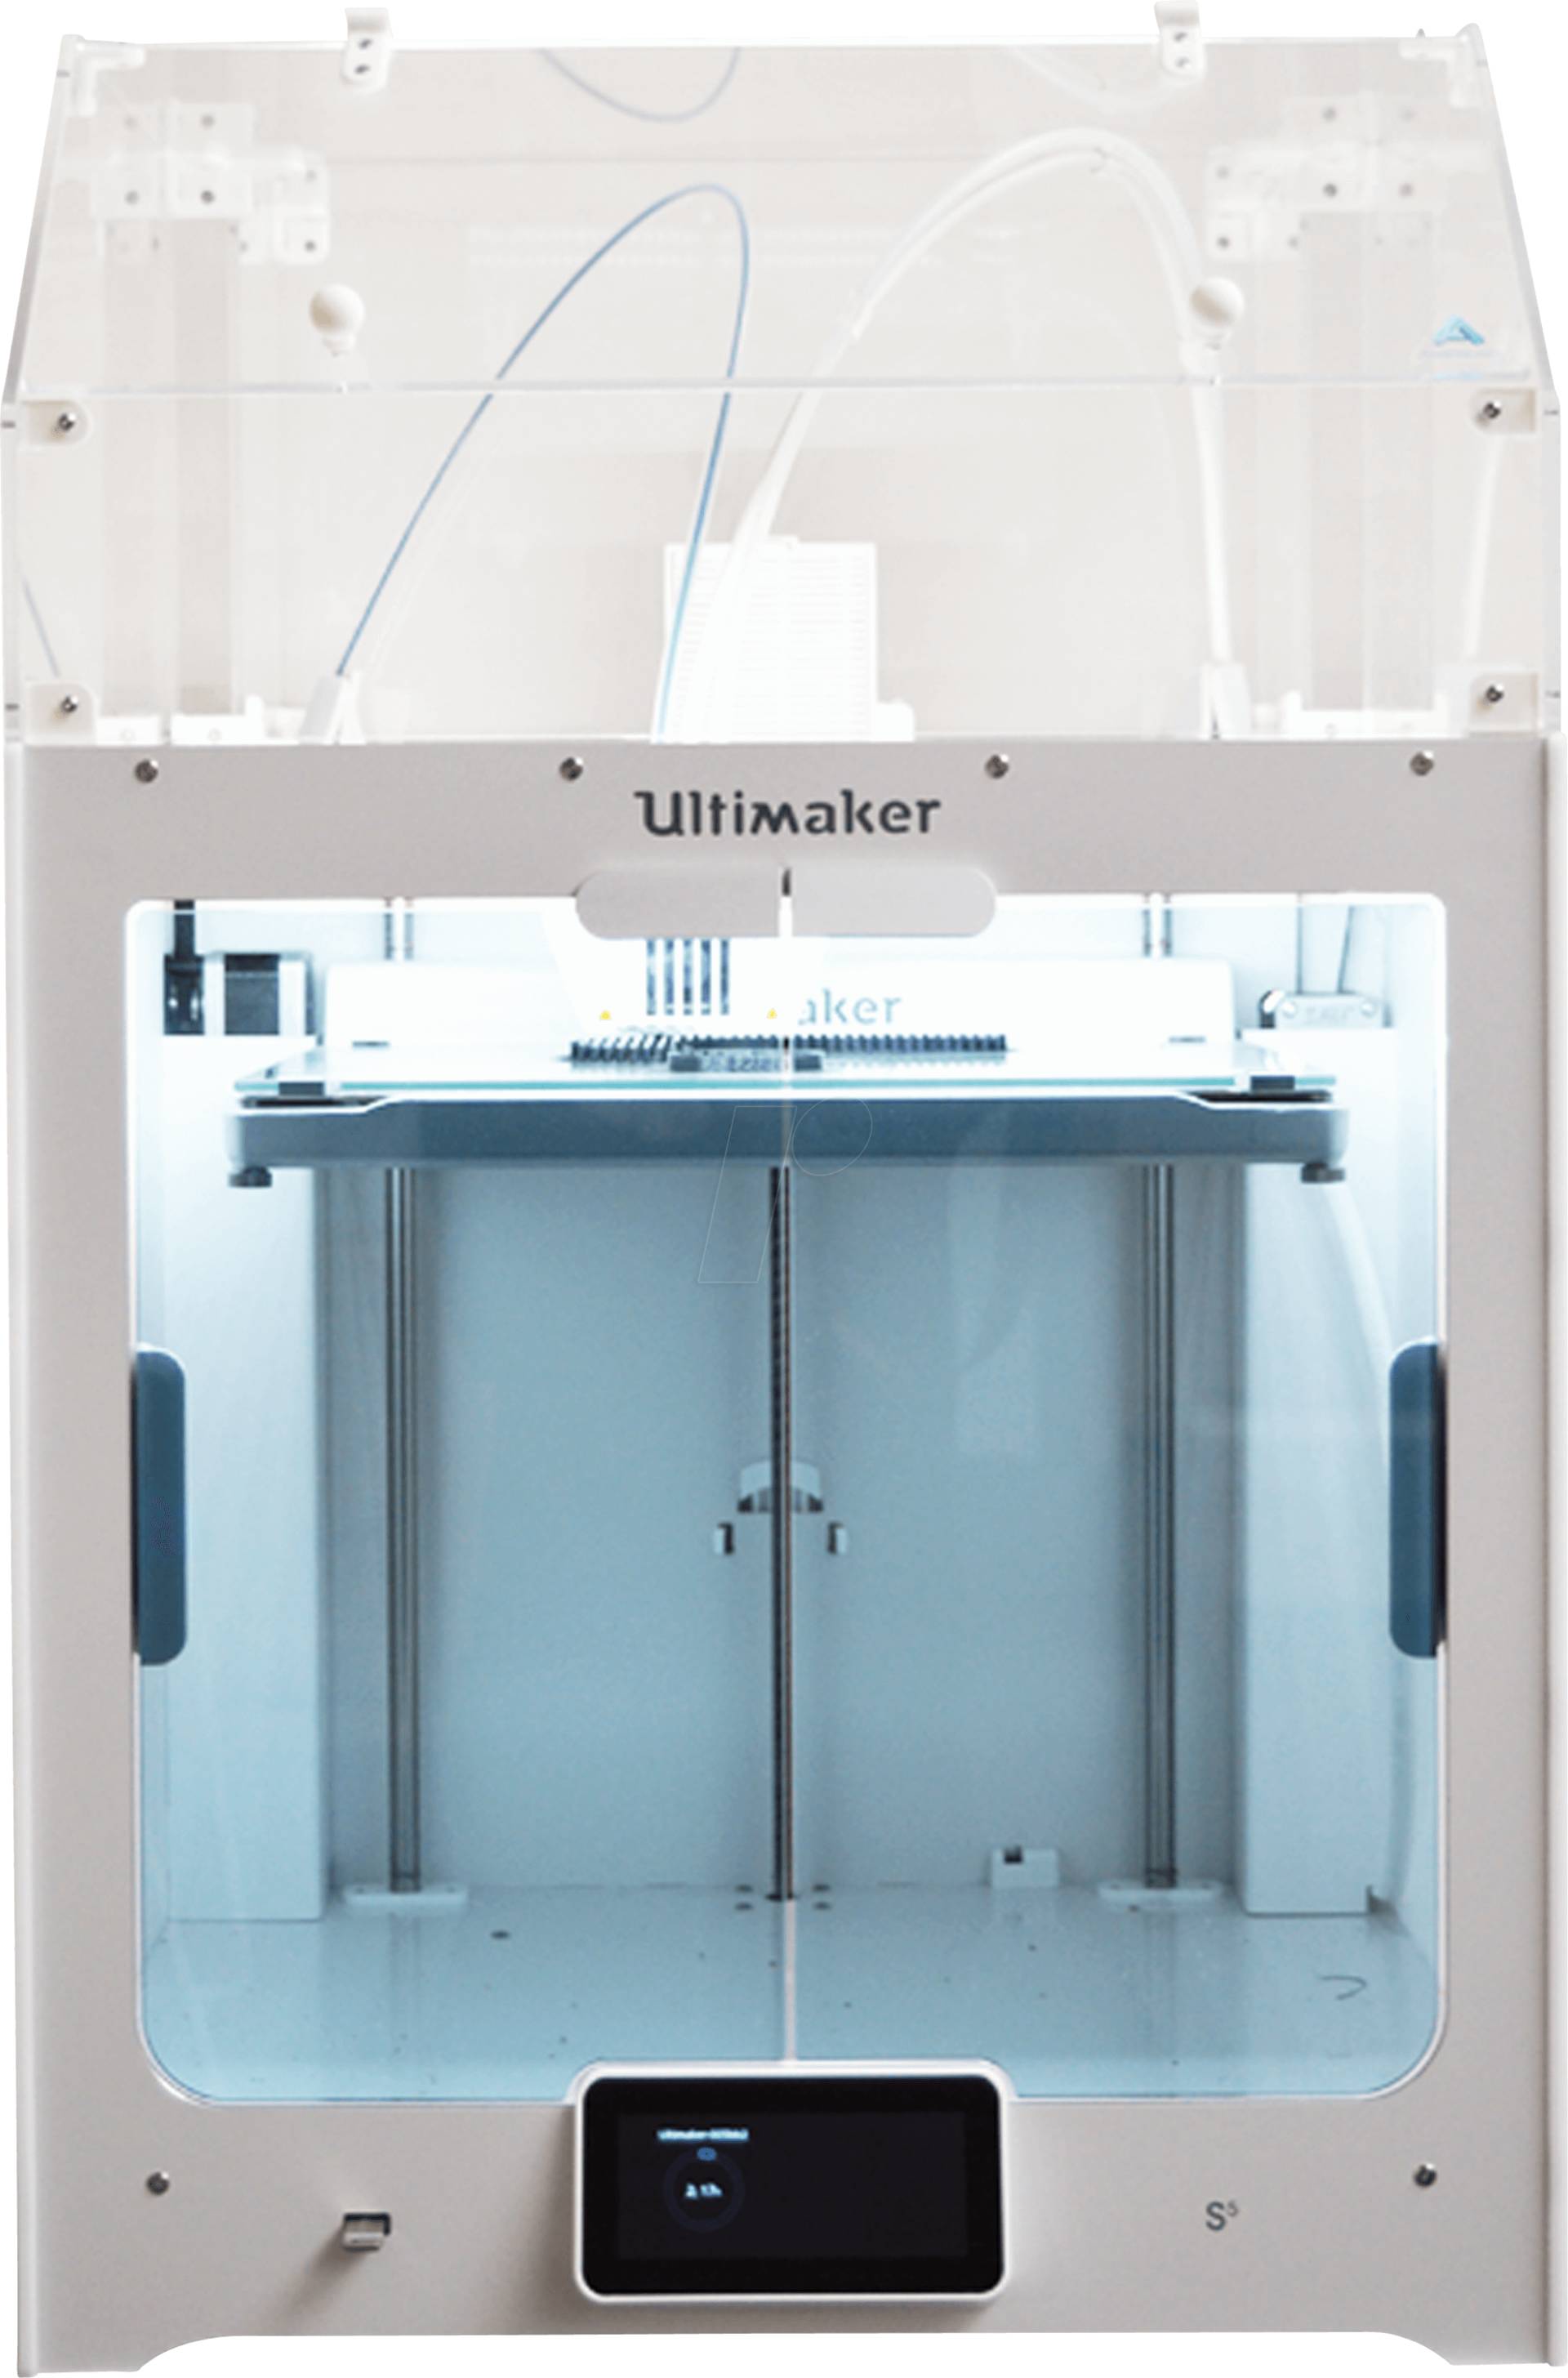 UM S5 COVER - 3D Druck, Ultimaker S5, Cover von ACCANTE